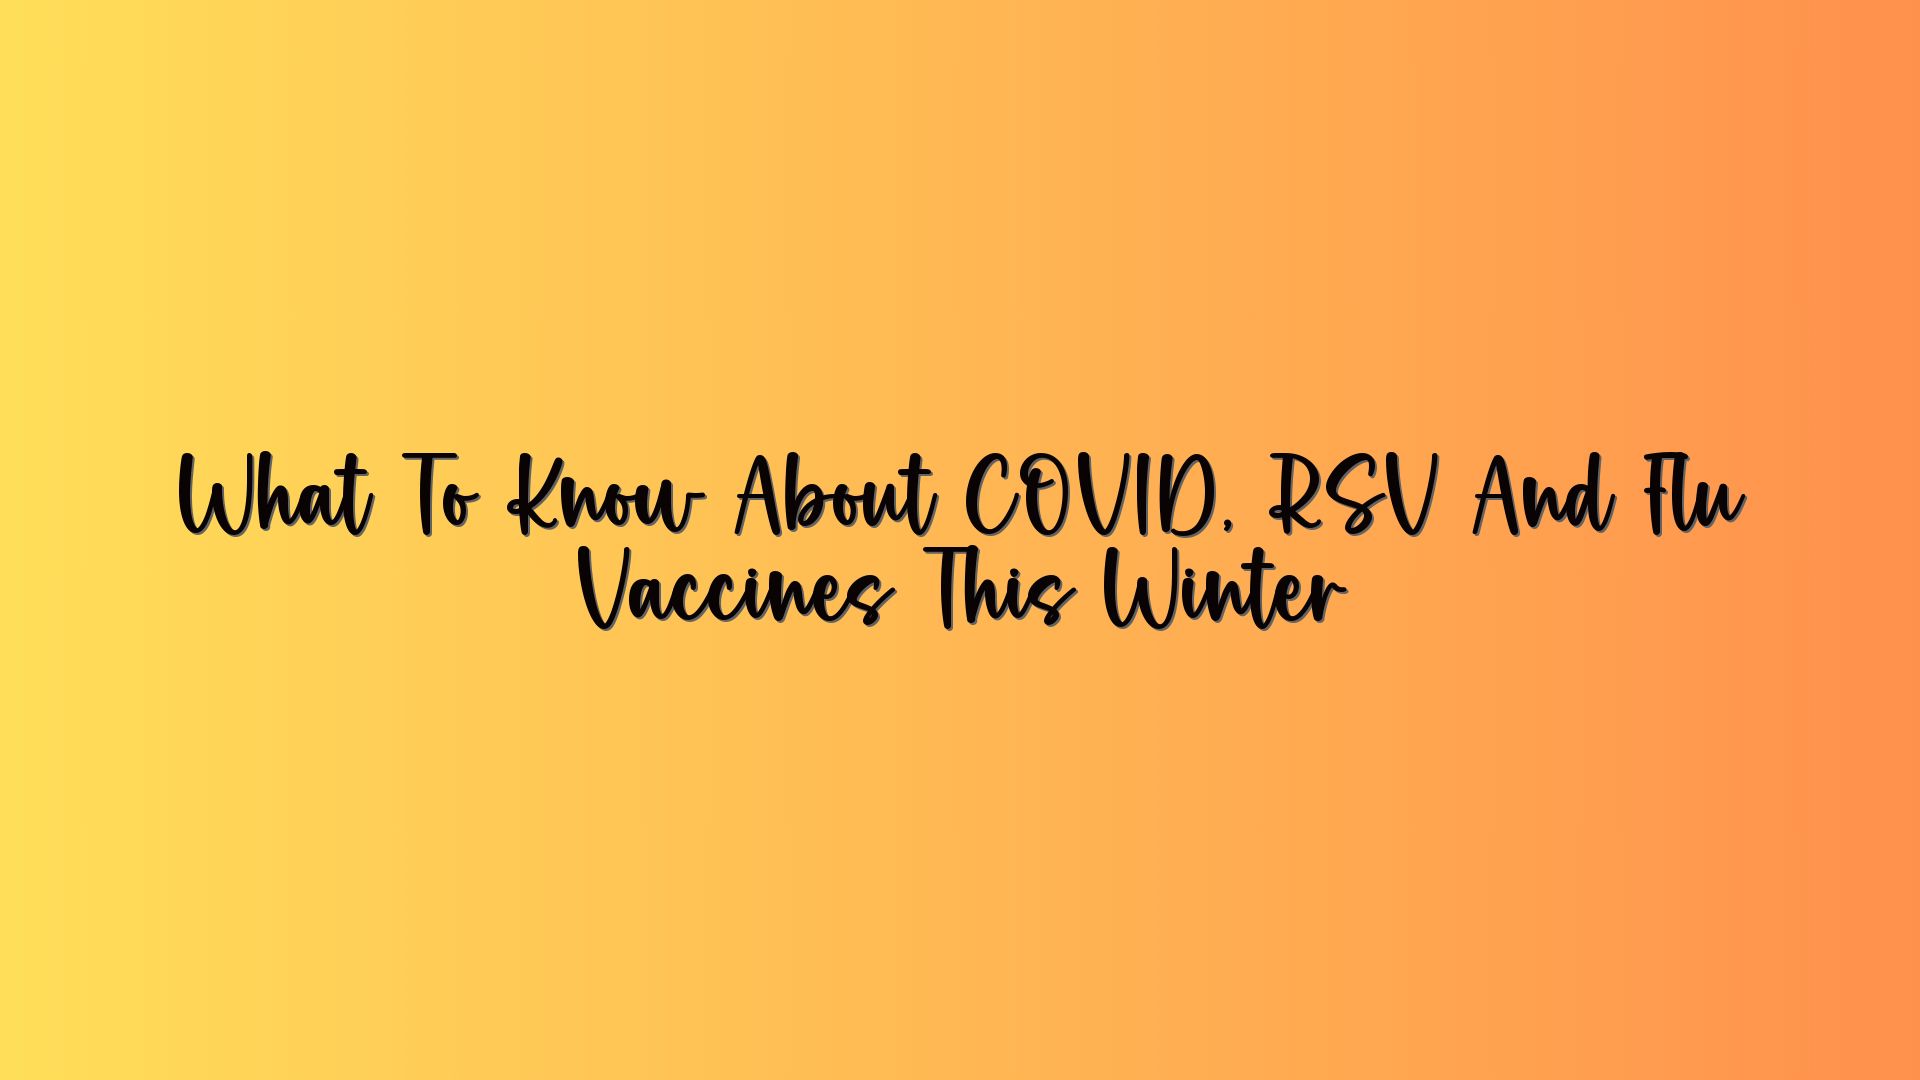 What To Know About COVID, RSV And Flu Vaccines This Winter